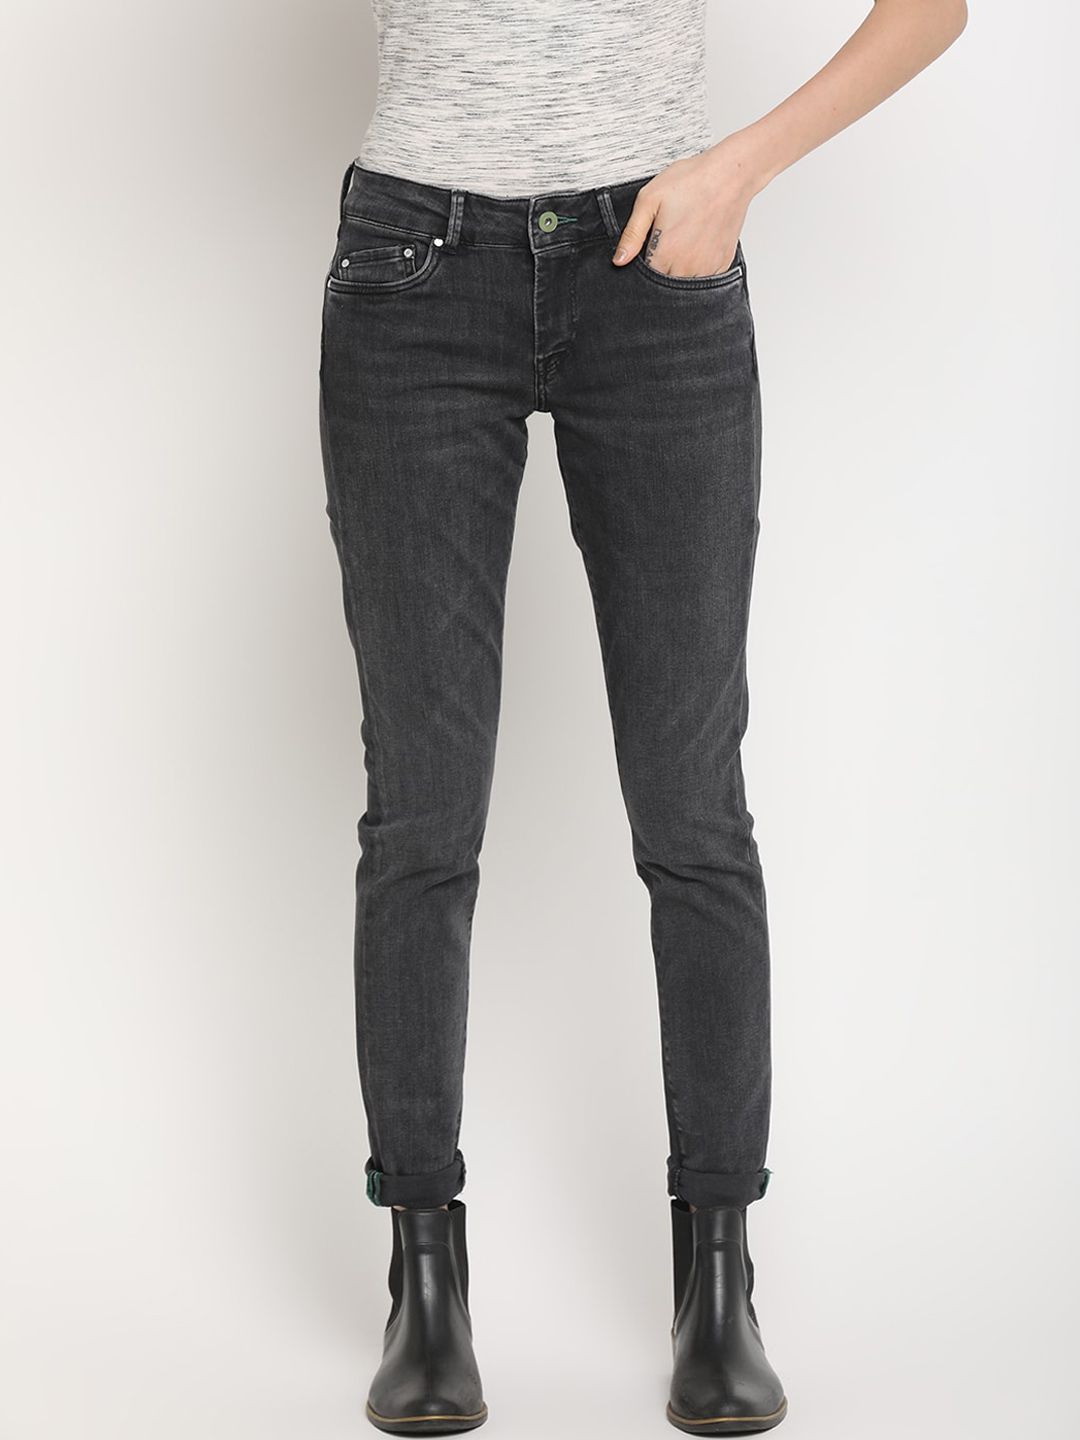 Pepe Jeans Women Charcoal Grey Skinny Fit Mid-Rise Clean Look Jeans Price in India